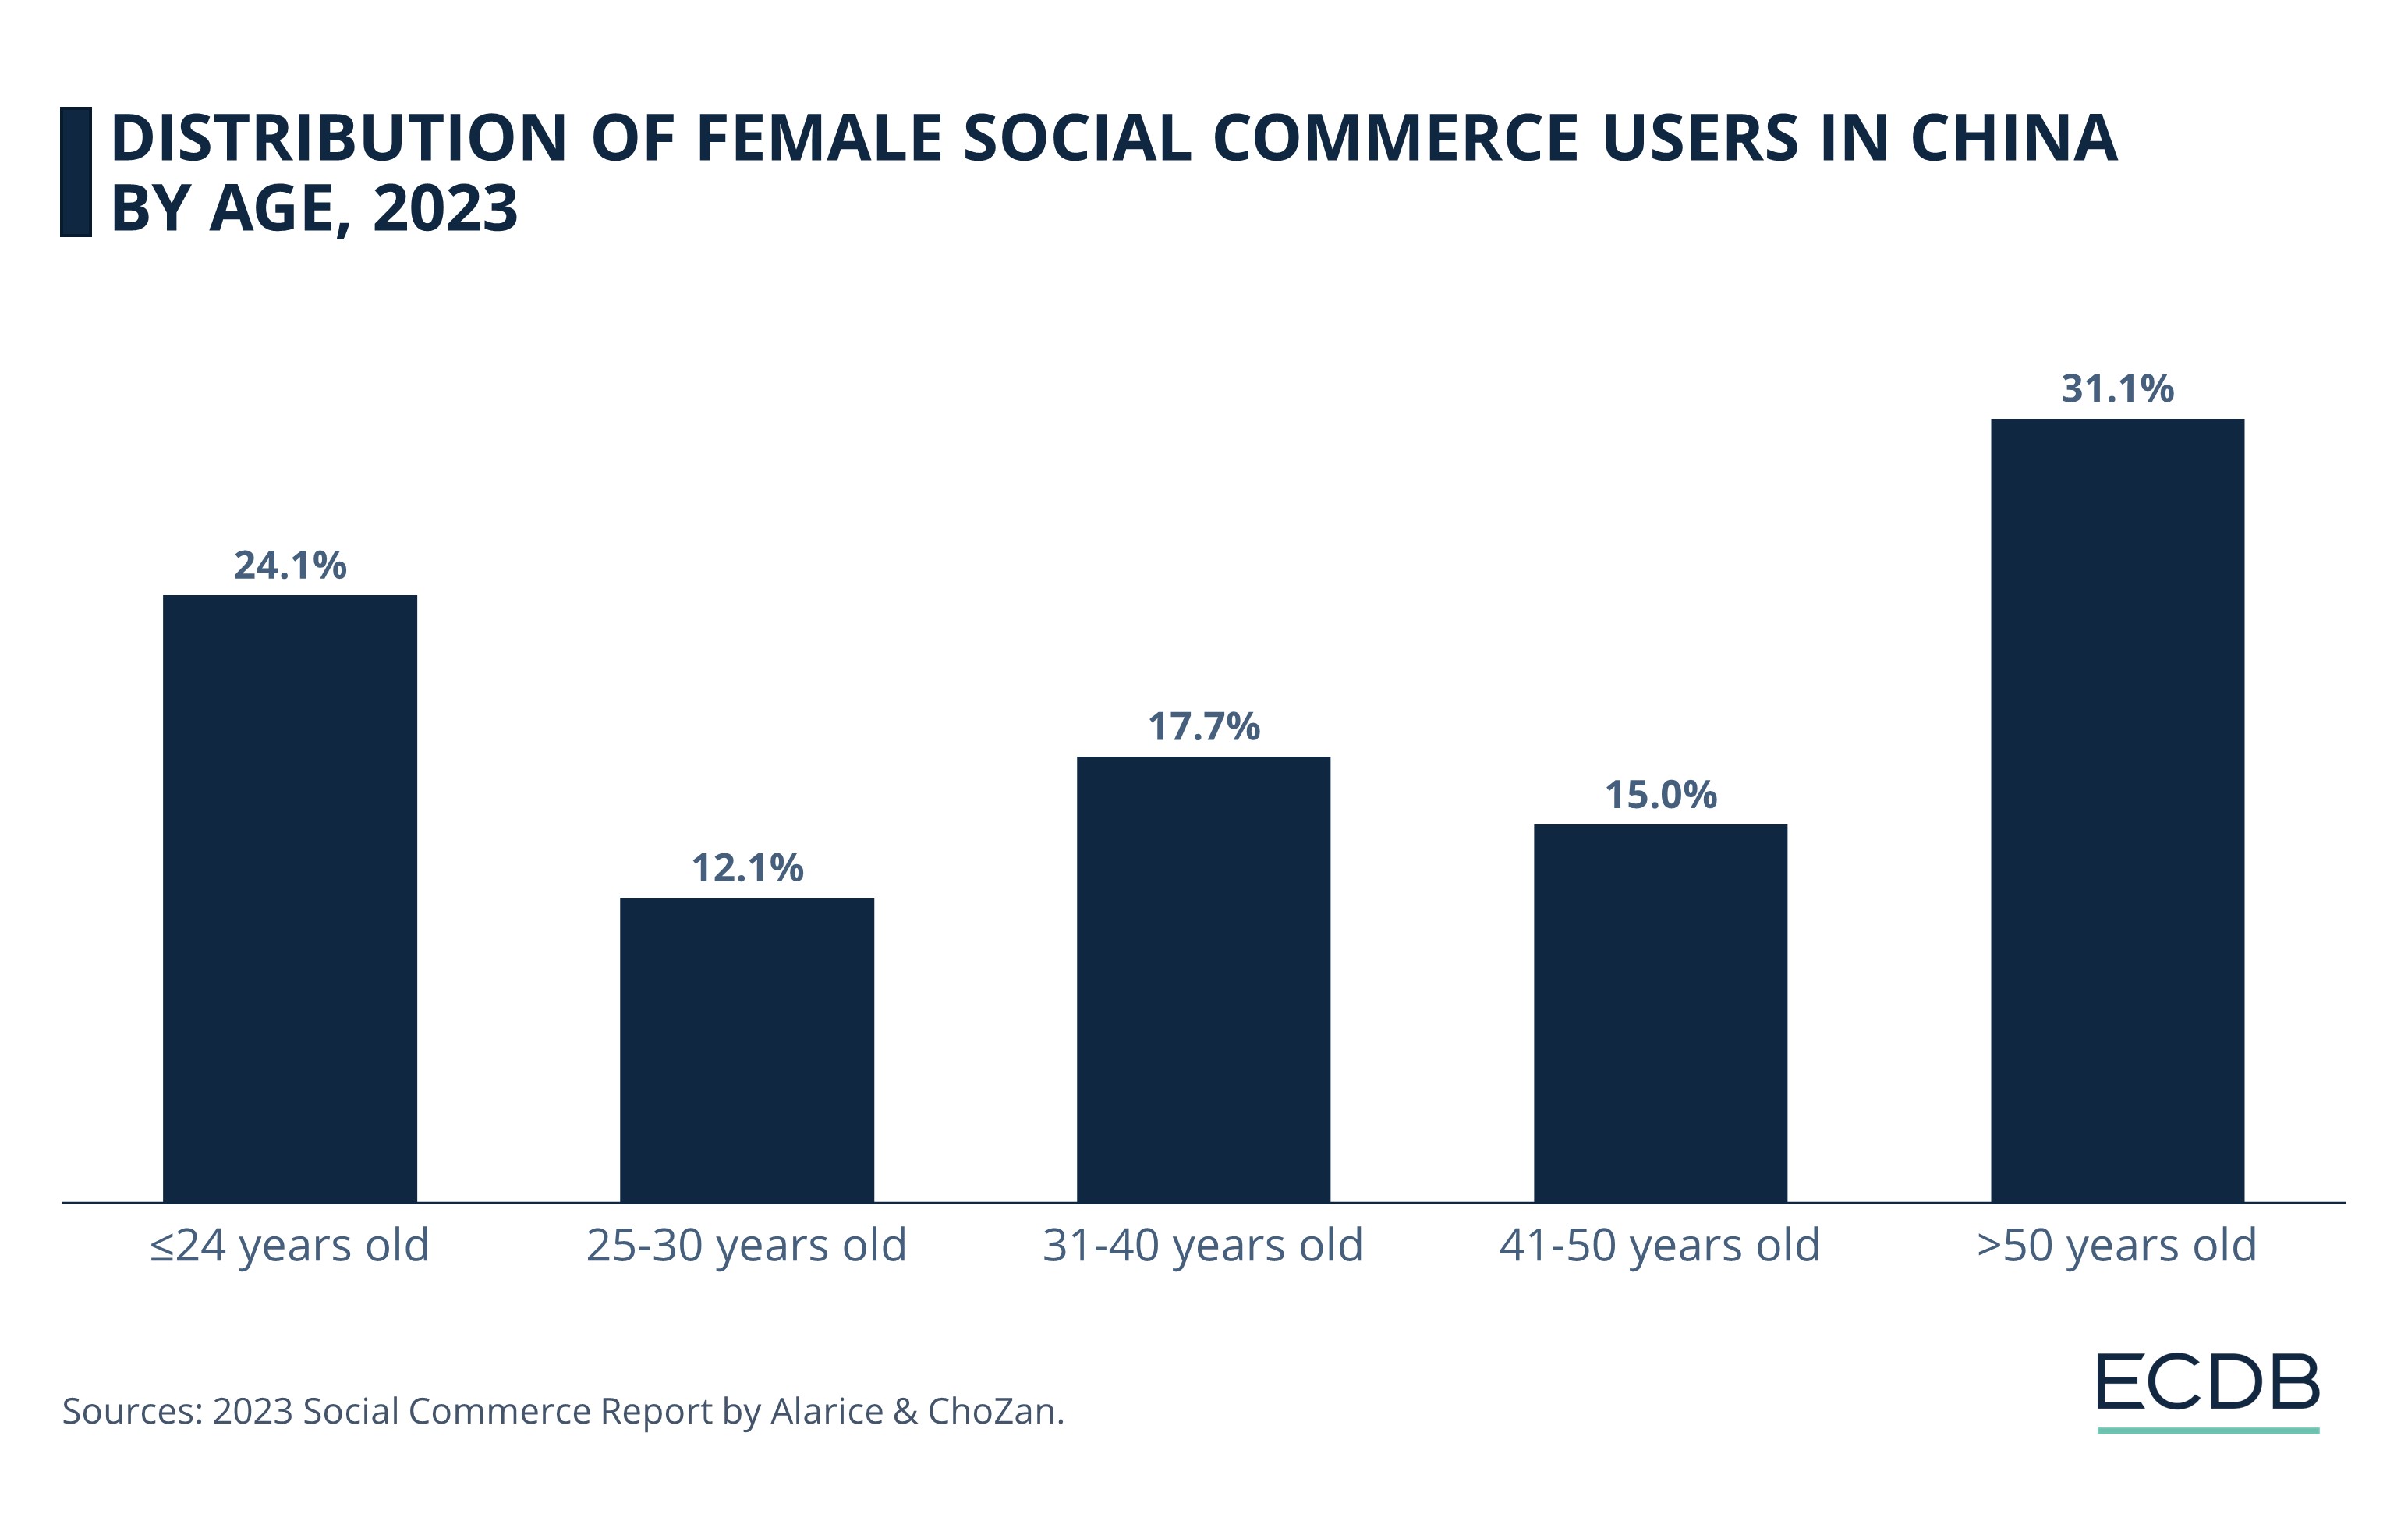 Distribution of Female Social Commercer Users by Age in China, 2023